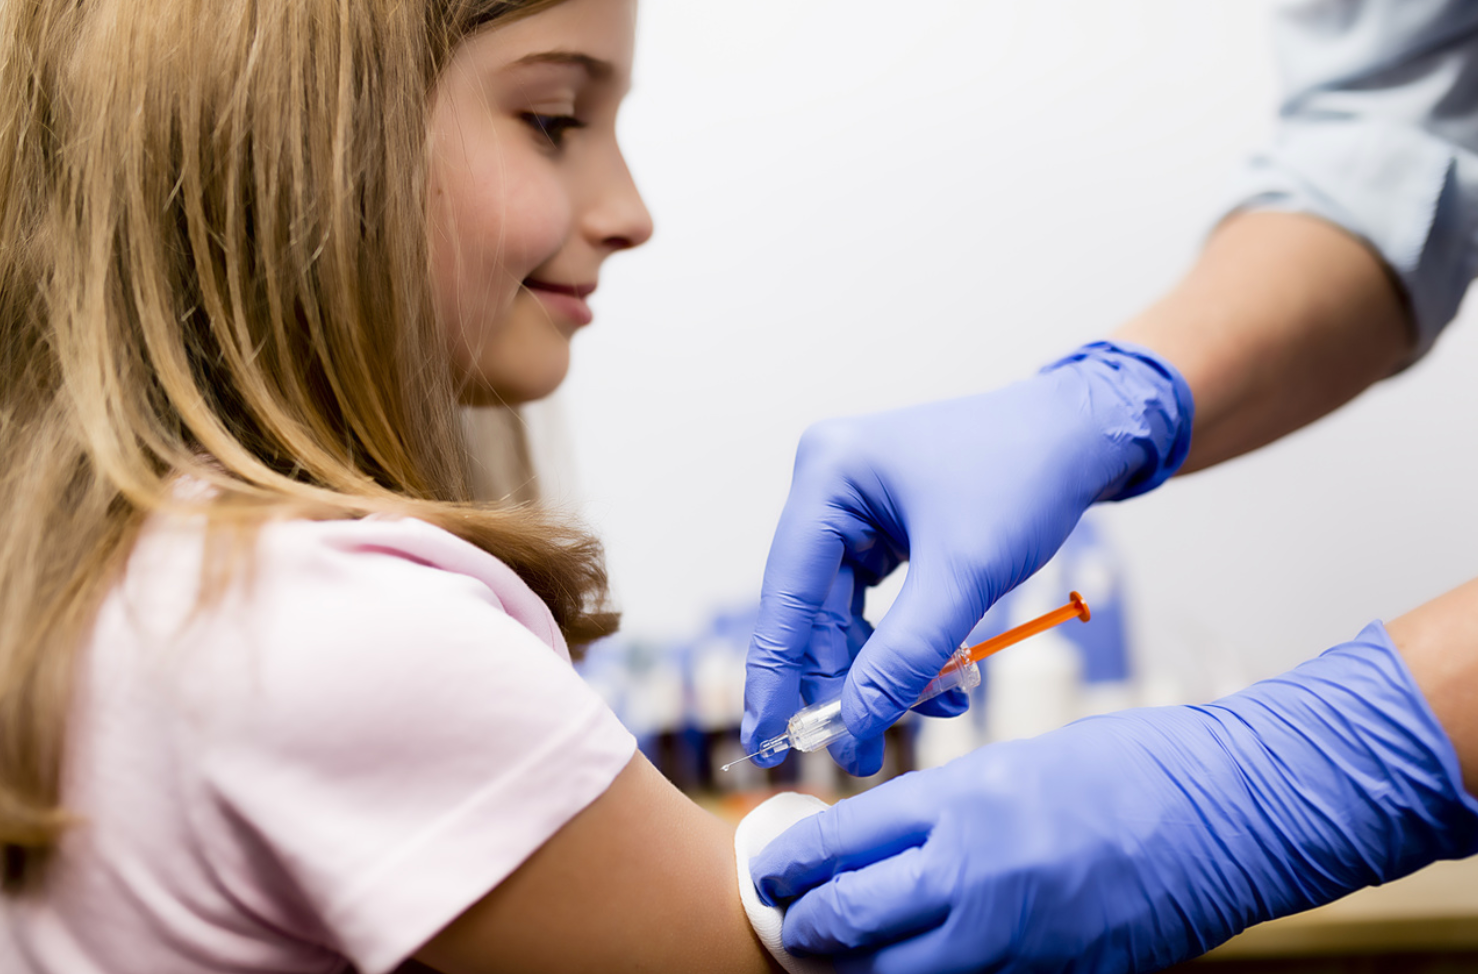 Vaccination Rates Among Children May Be Impacted by Safety Concerns 